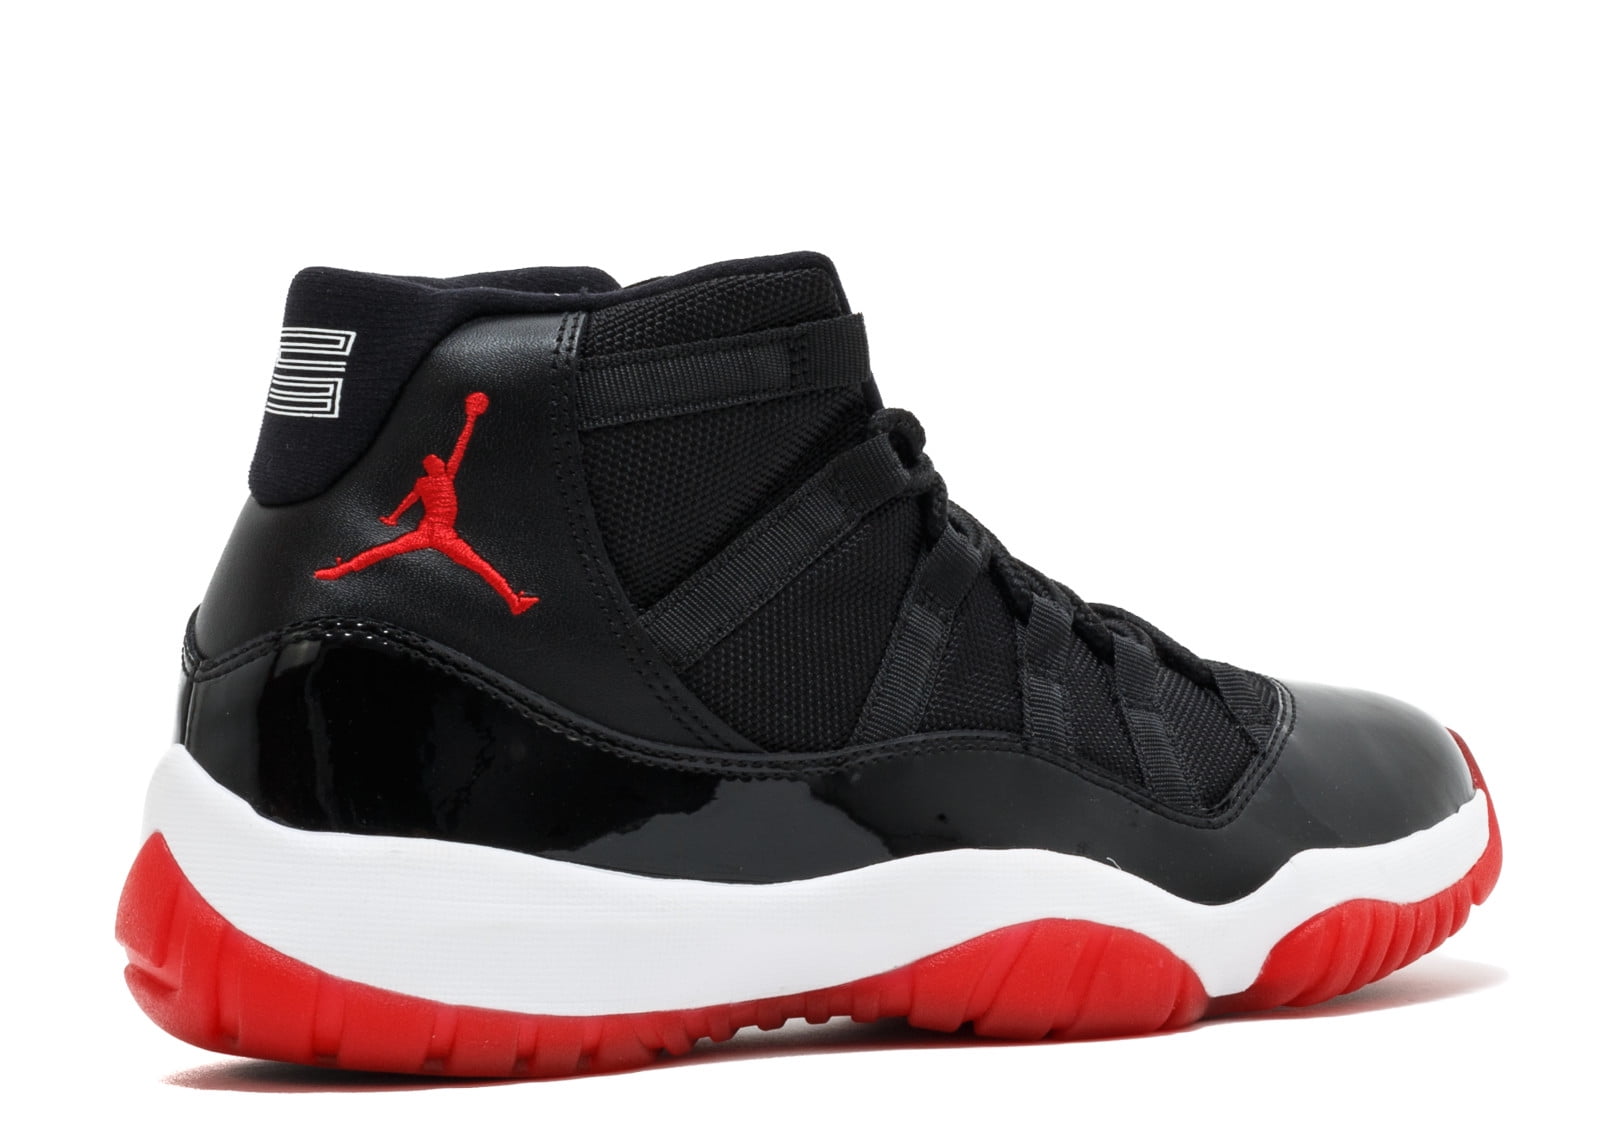 retro 11s red and black